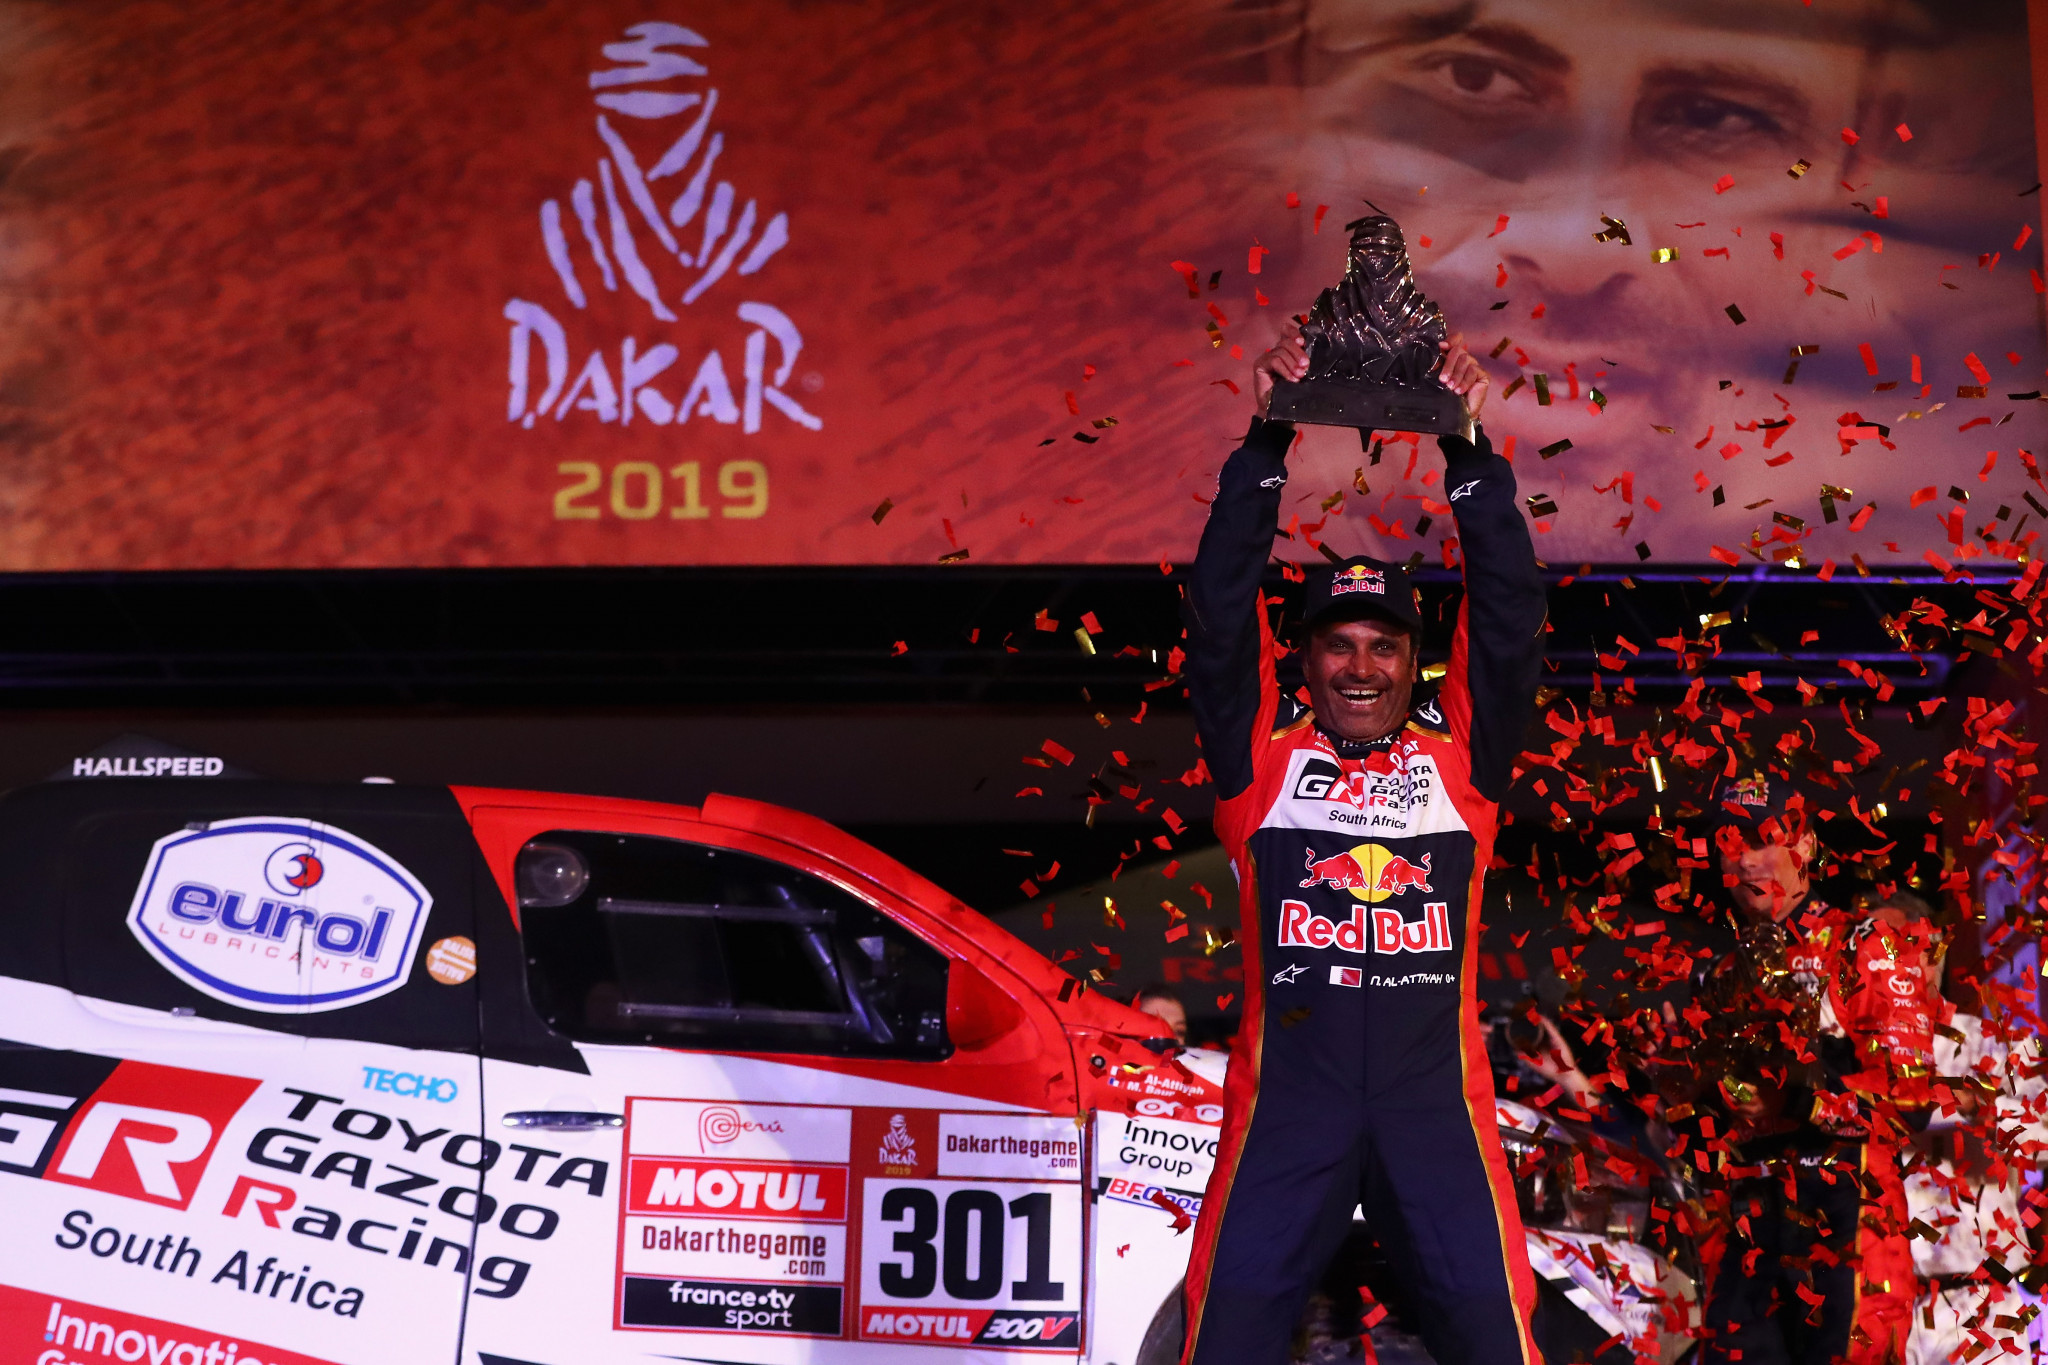 Nasser Al-Attiyah won the Dakar Rally for the third time in January ©Getty Images